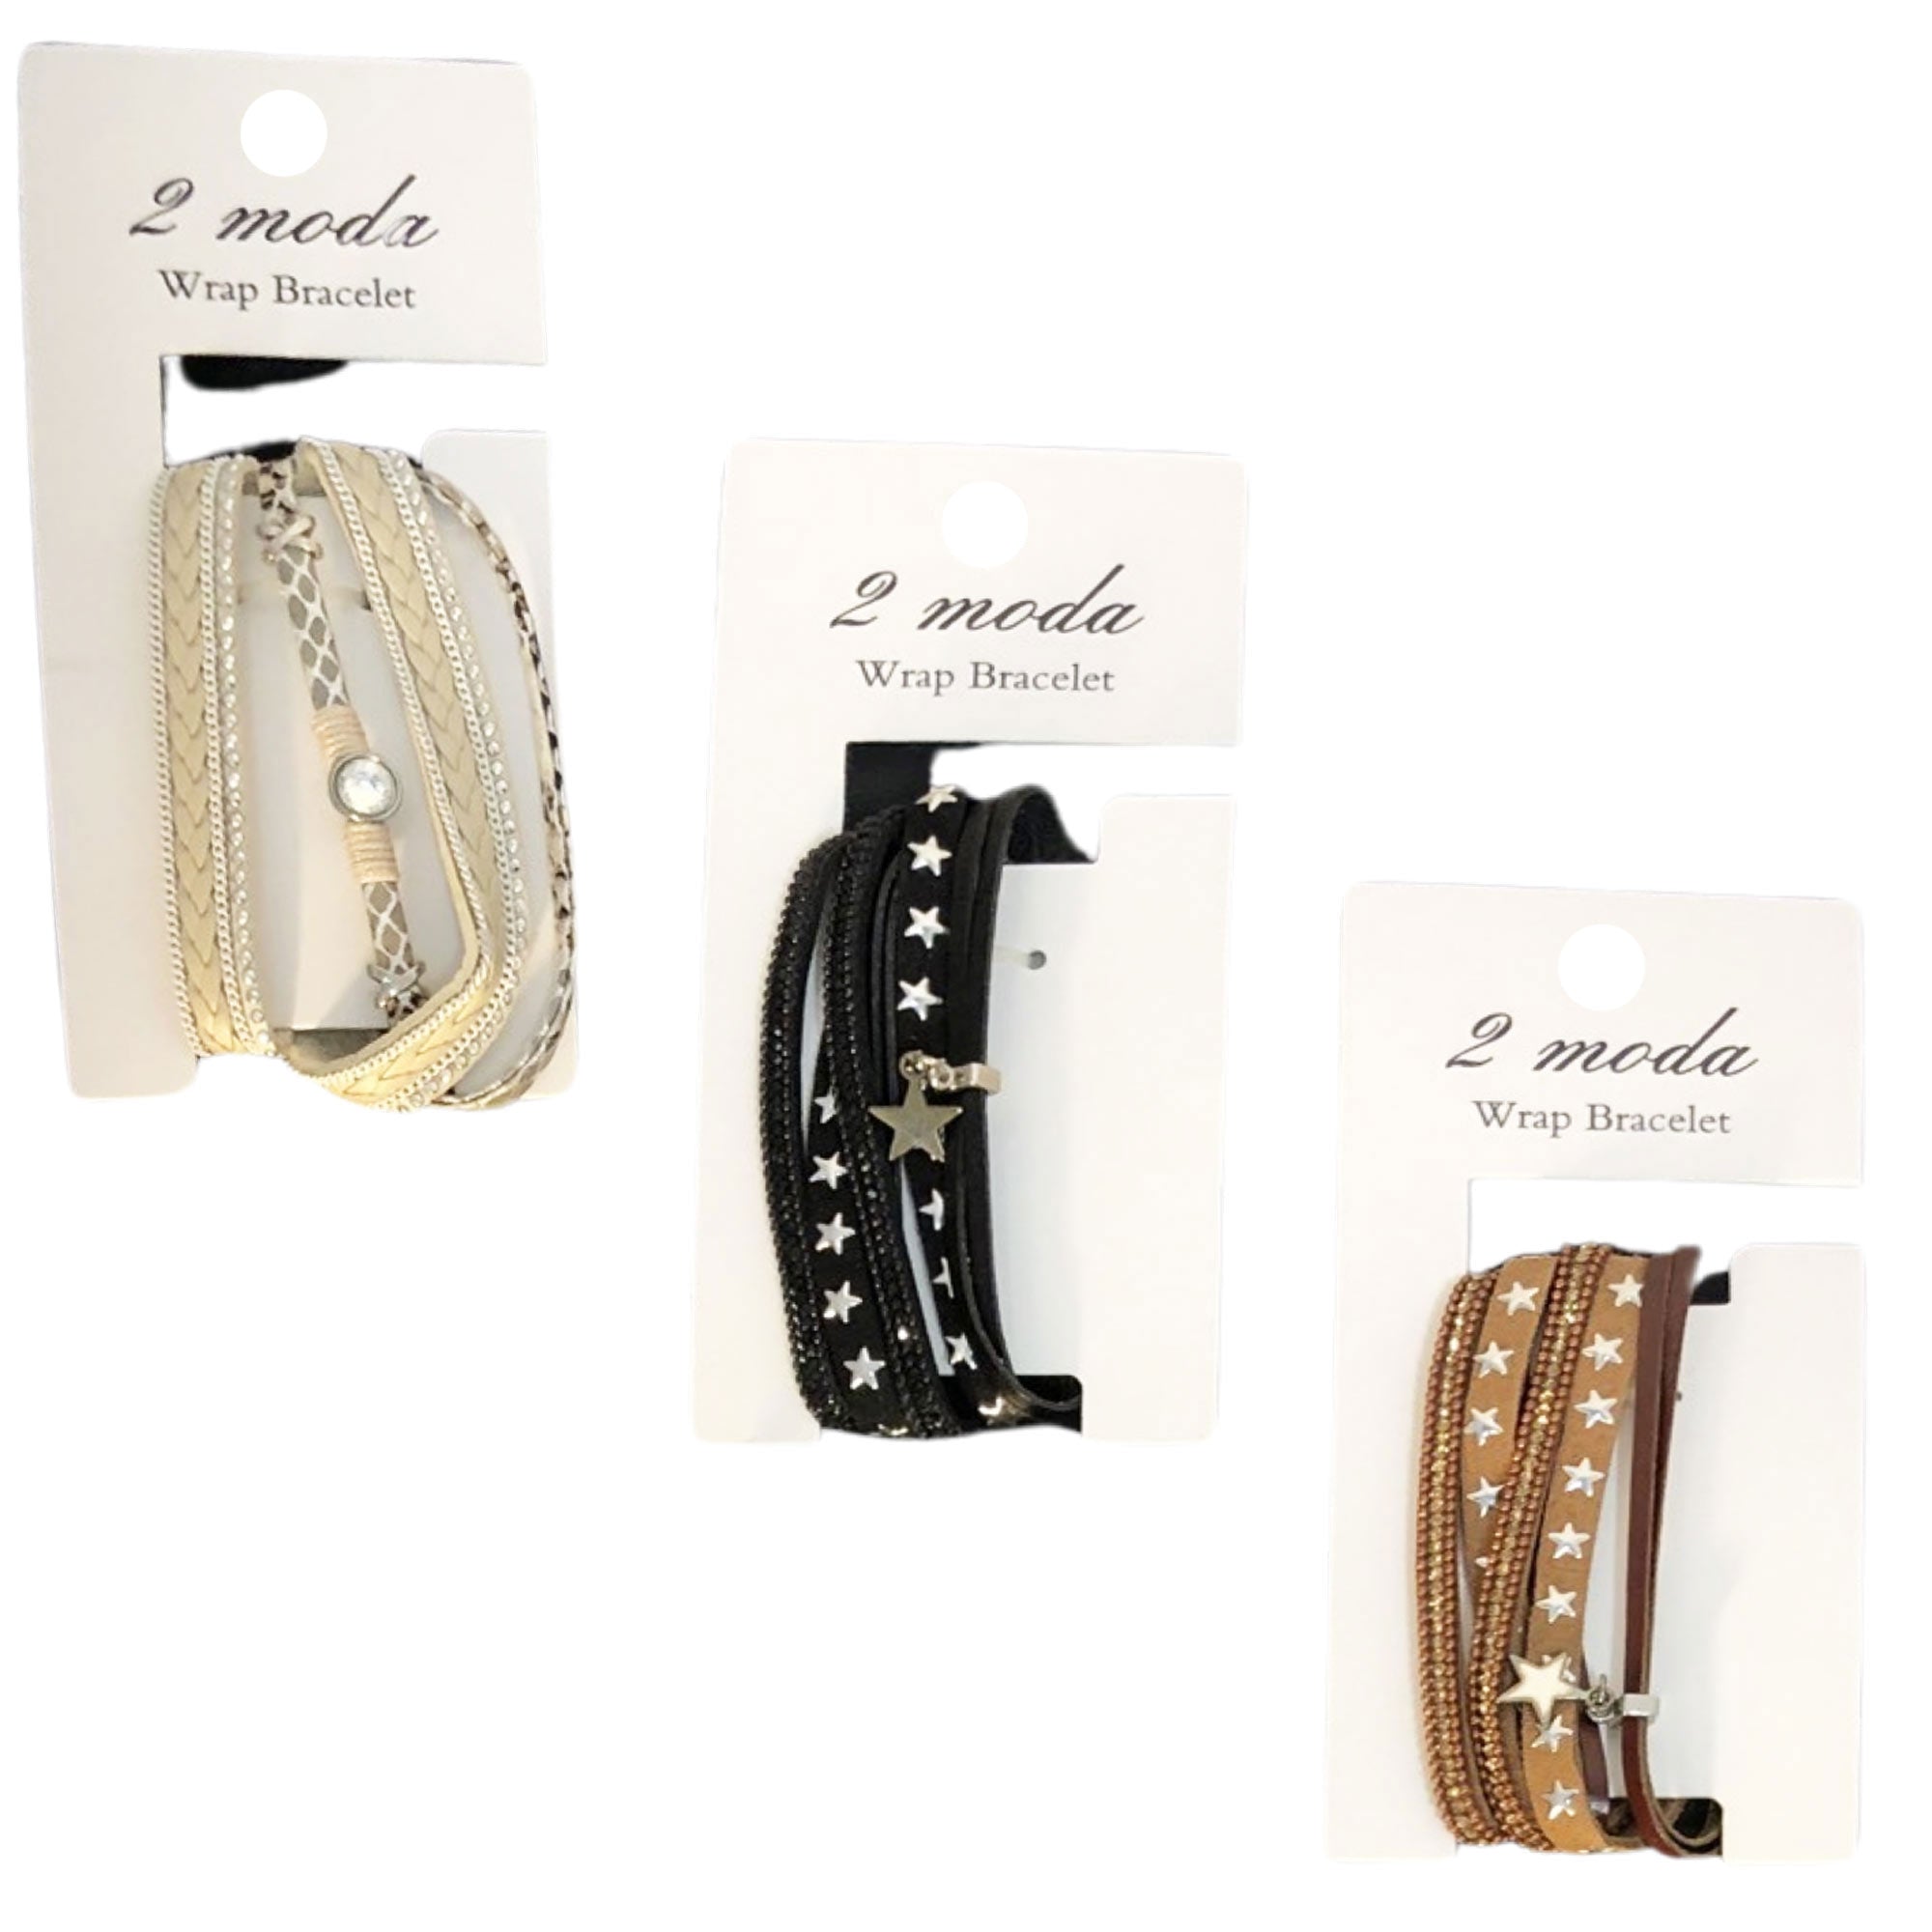 CLEARANCE WRAP BRACELETS ON A RETAIL CARD (CASE OF 36 - $1.75 / PIECE)  Wholesale Bracelets in Assorted Styles & Colors SKU: 5584-36